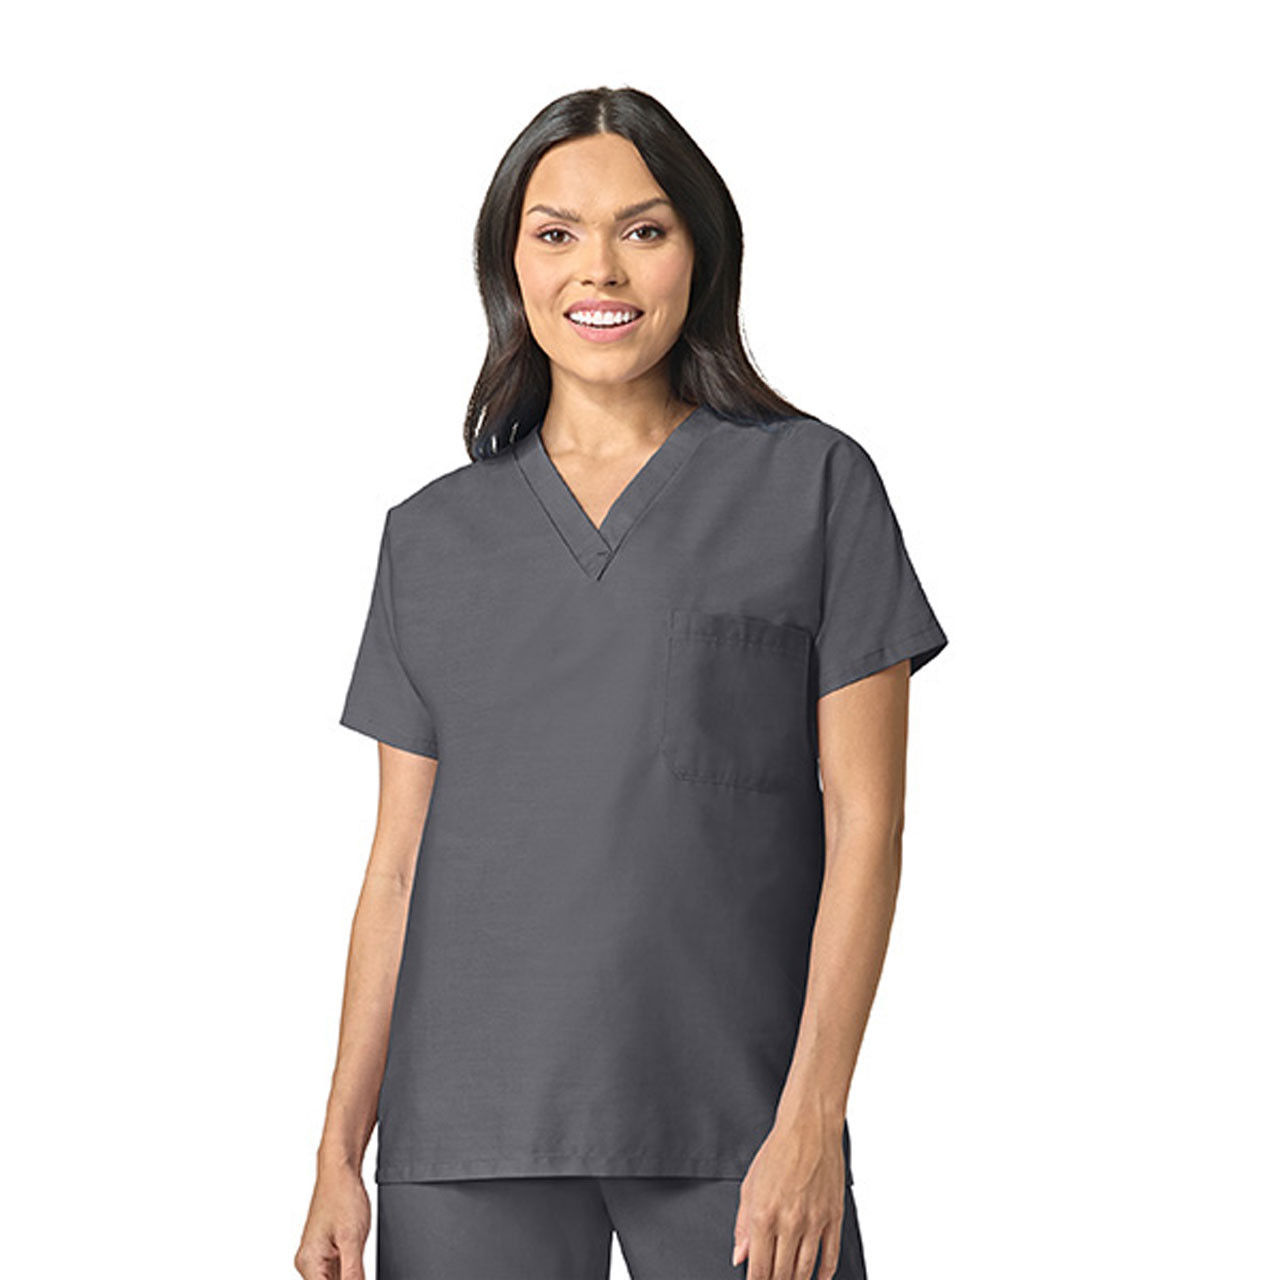 Does the Pewter Gray Scrub Top have any vents?